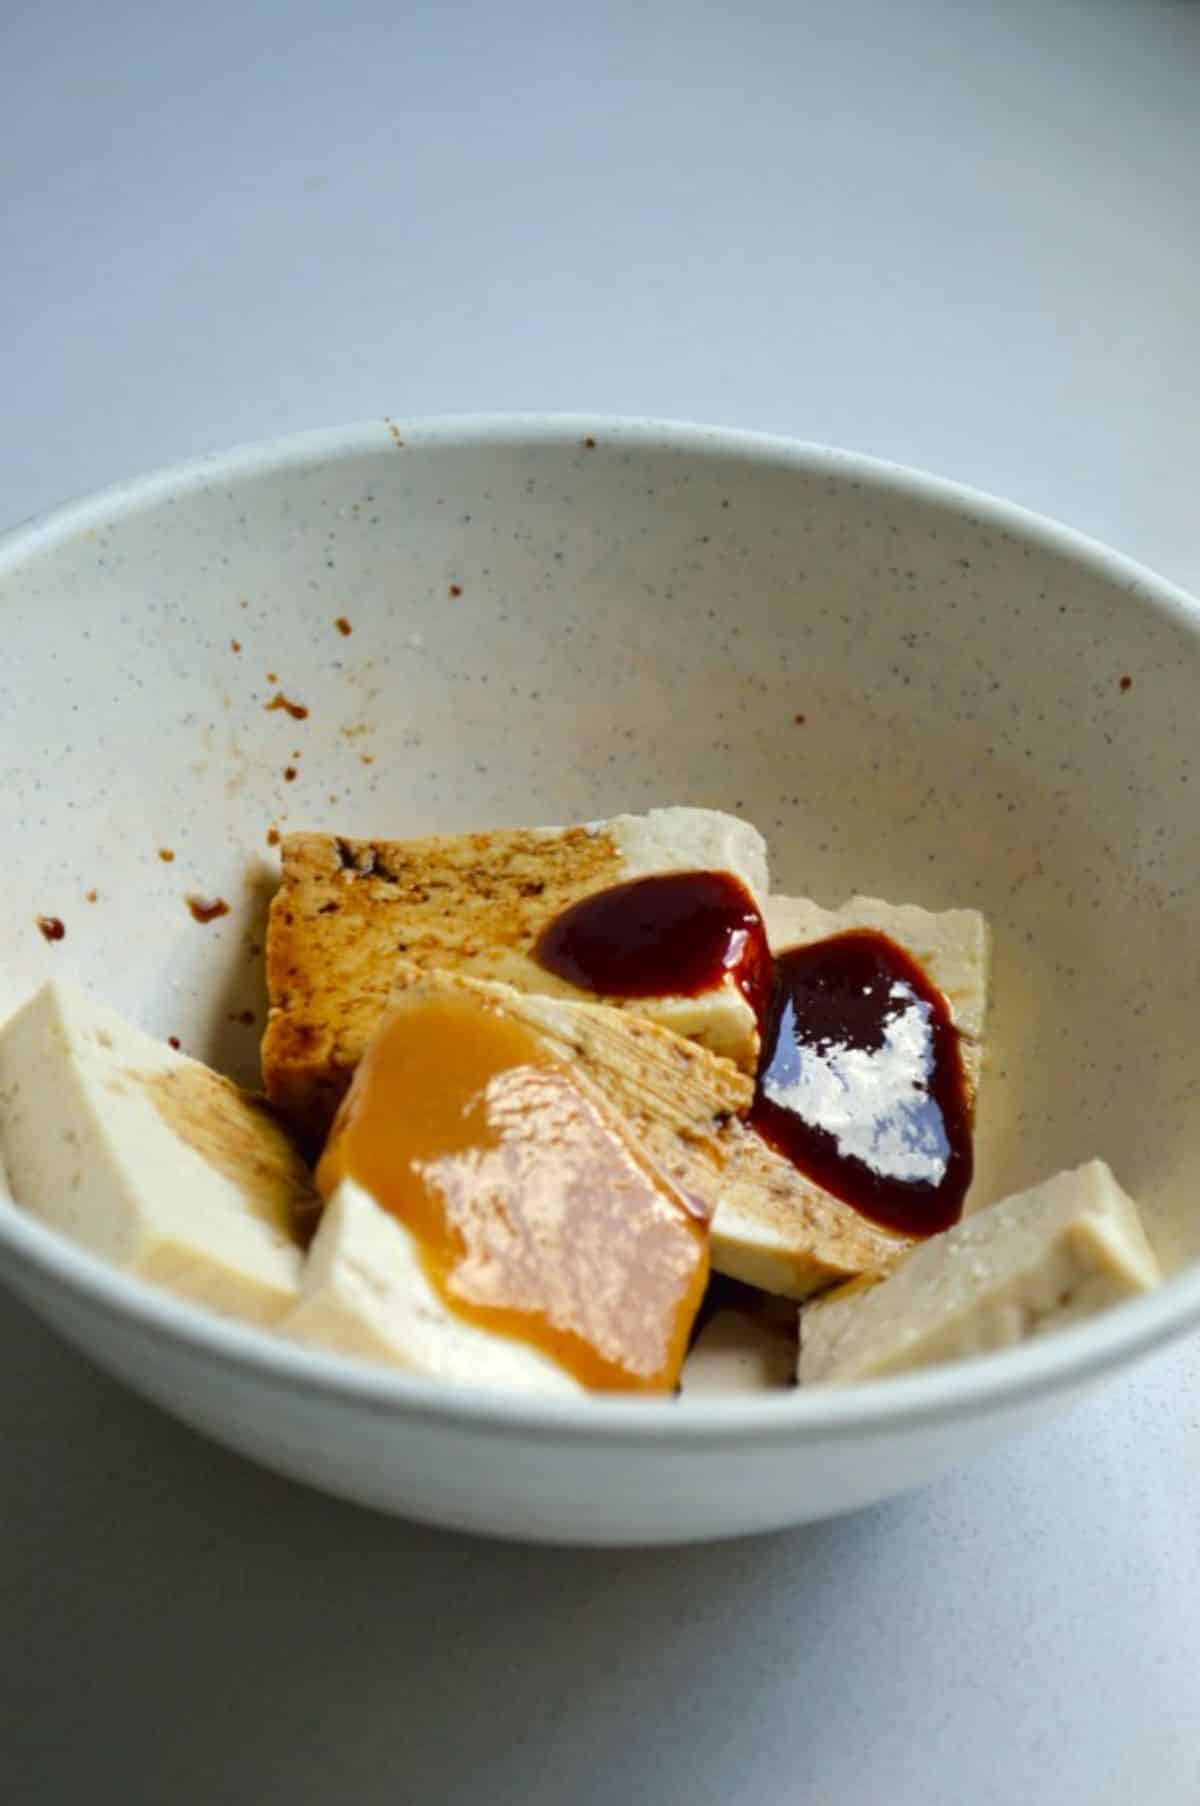 Sliced Tofu with sauce in a white bowl.